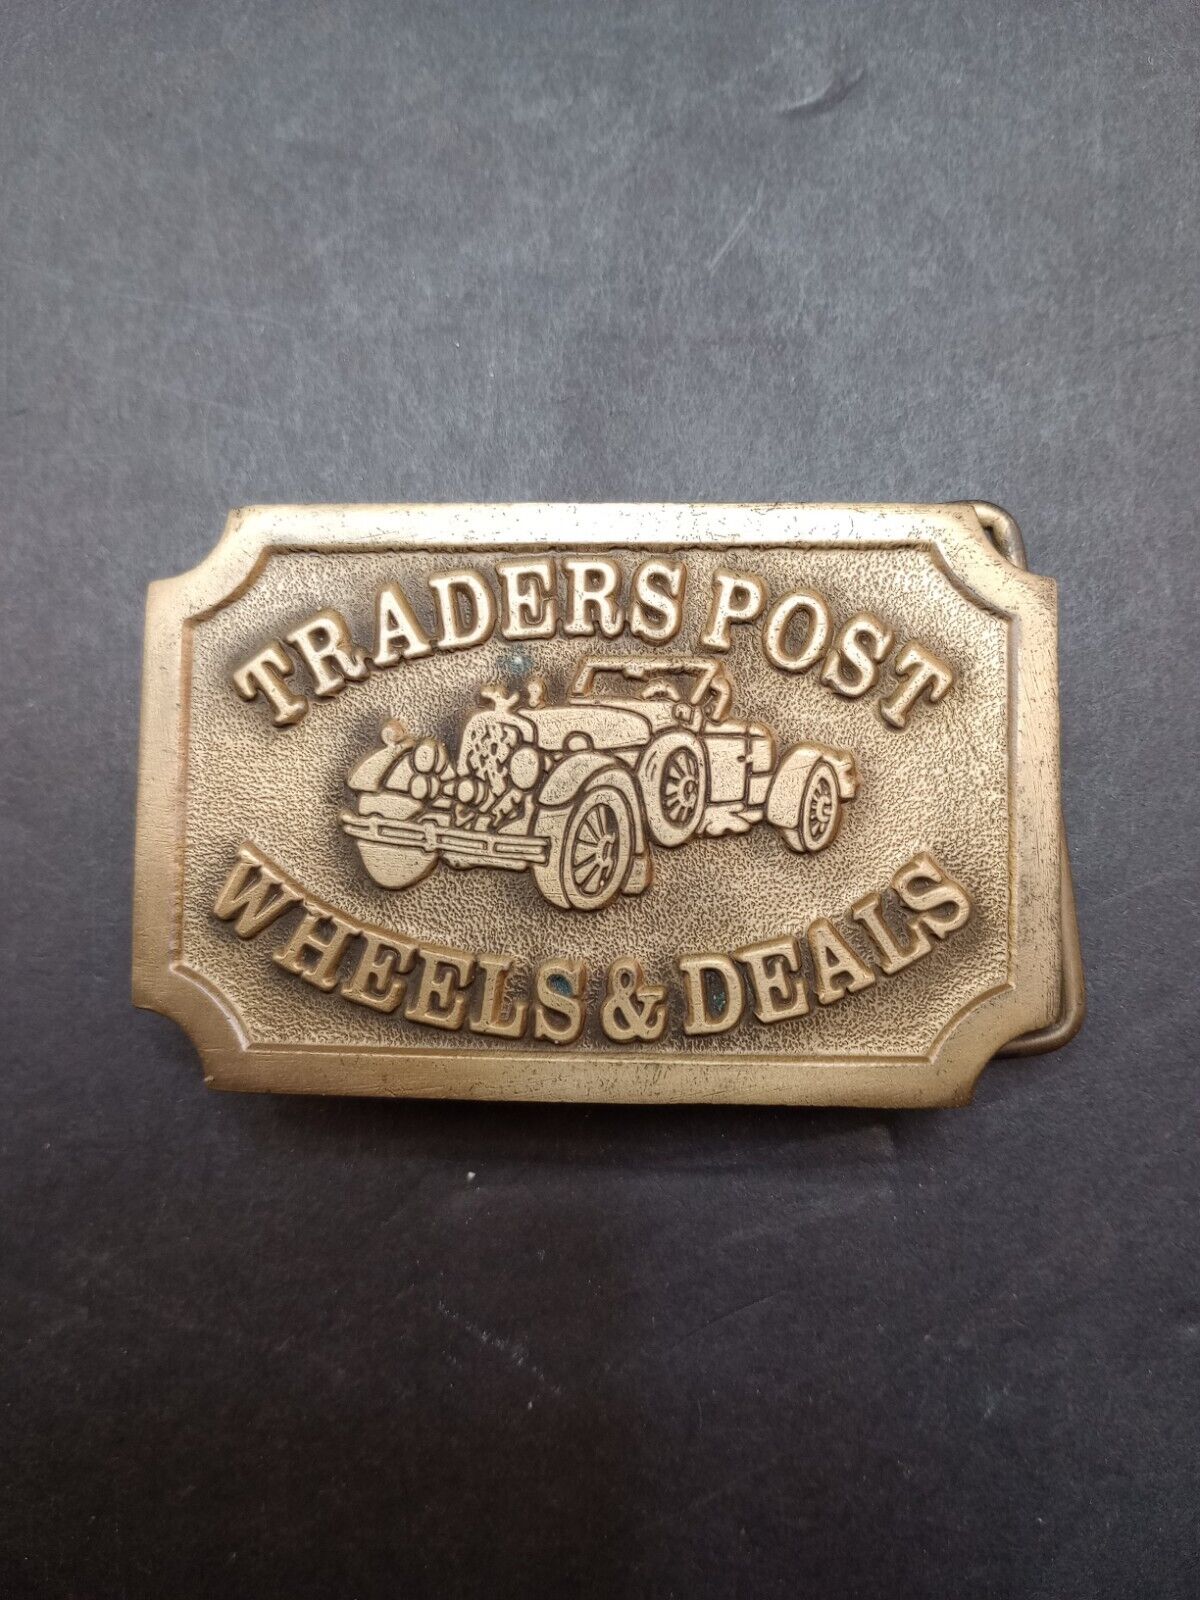 VERY RARE 1981, 10th Anniversary 1 Of 100 Trader\'s Post,Wheels & Deals  BUCKLE 